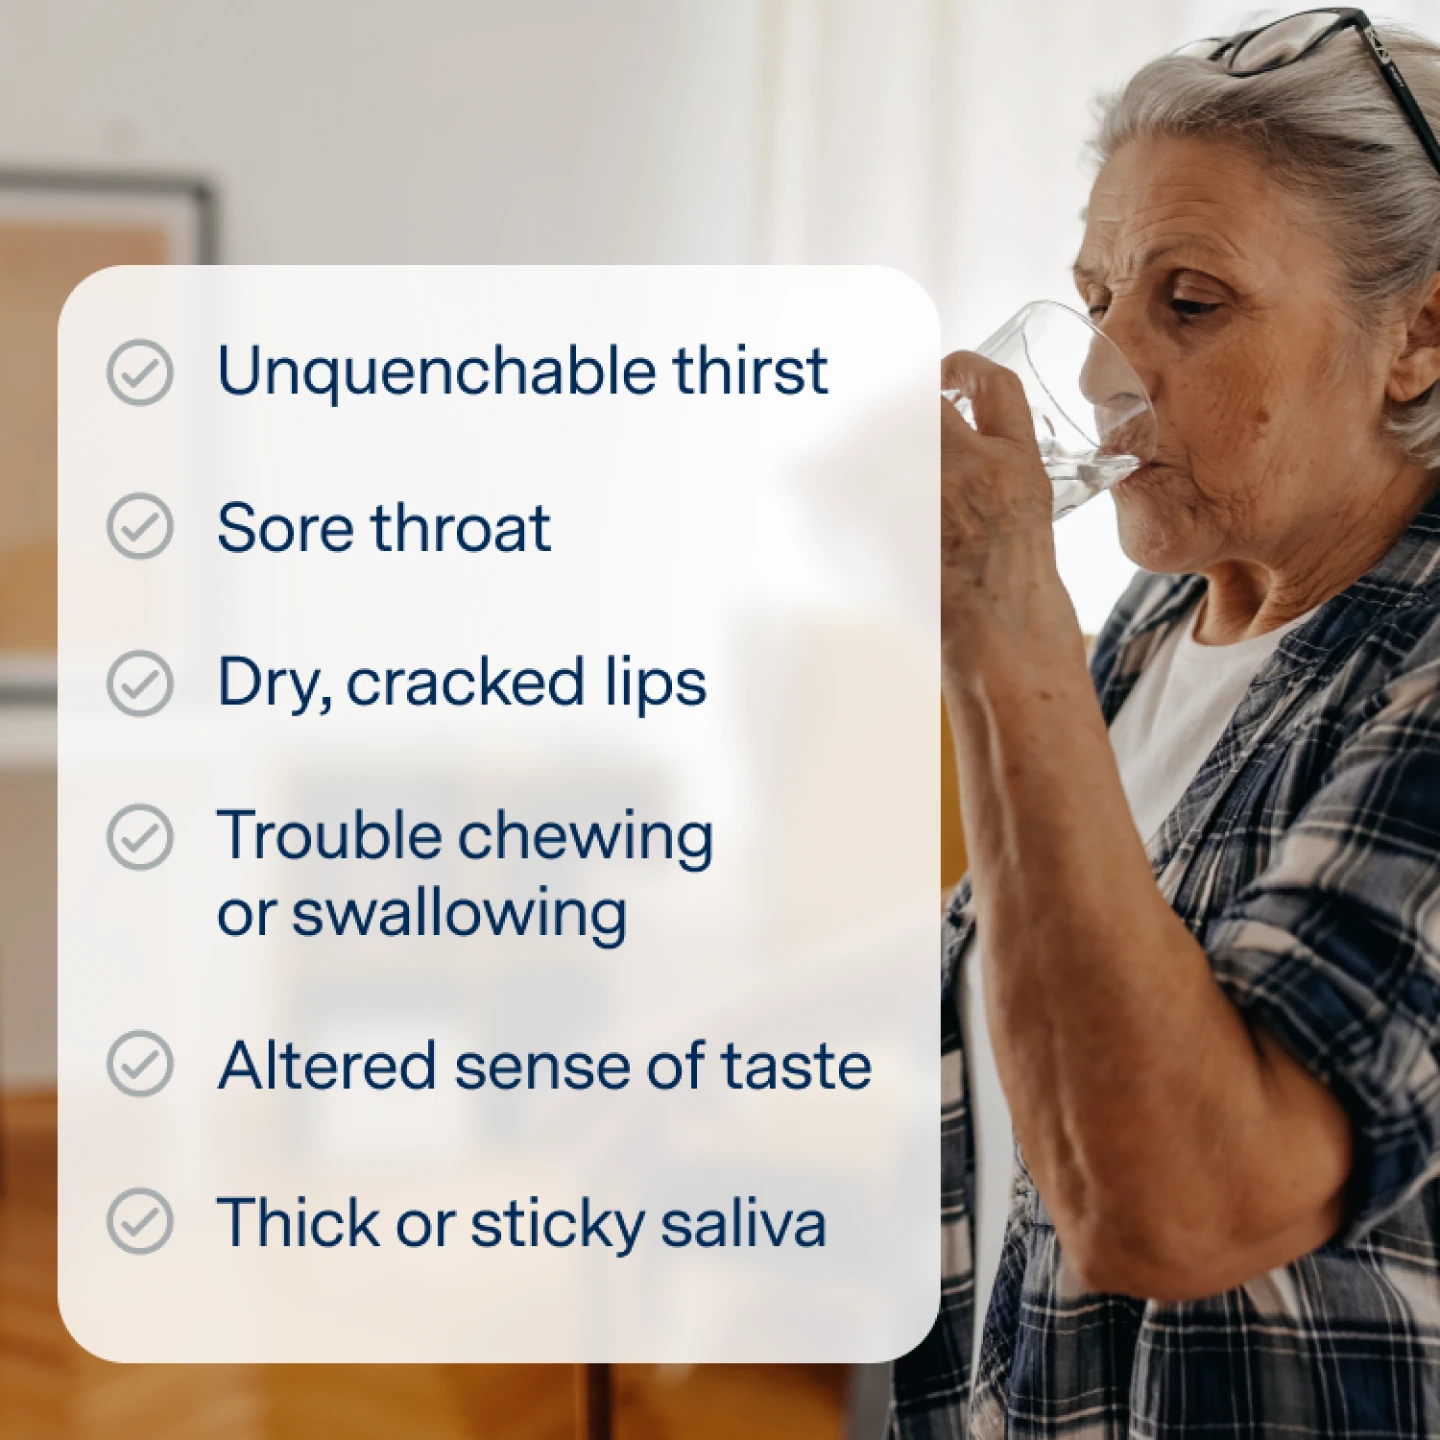 Dry mouth symptoms:
Unquenchable thirst
Sore throat
Dry, cracked lips
Trouble chewing or swallowing
Altered sense of taste
Thick or sticky saliva